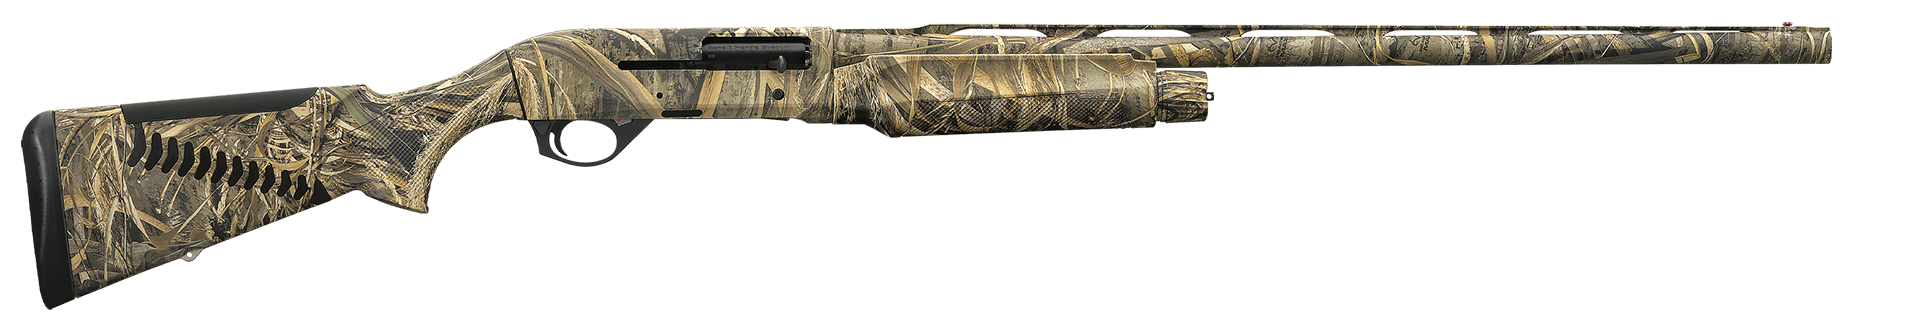 benelli-m2-comfortech-camo-max-5-20.png